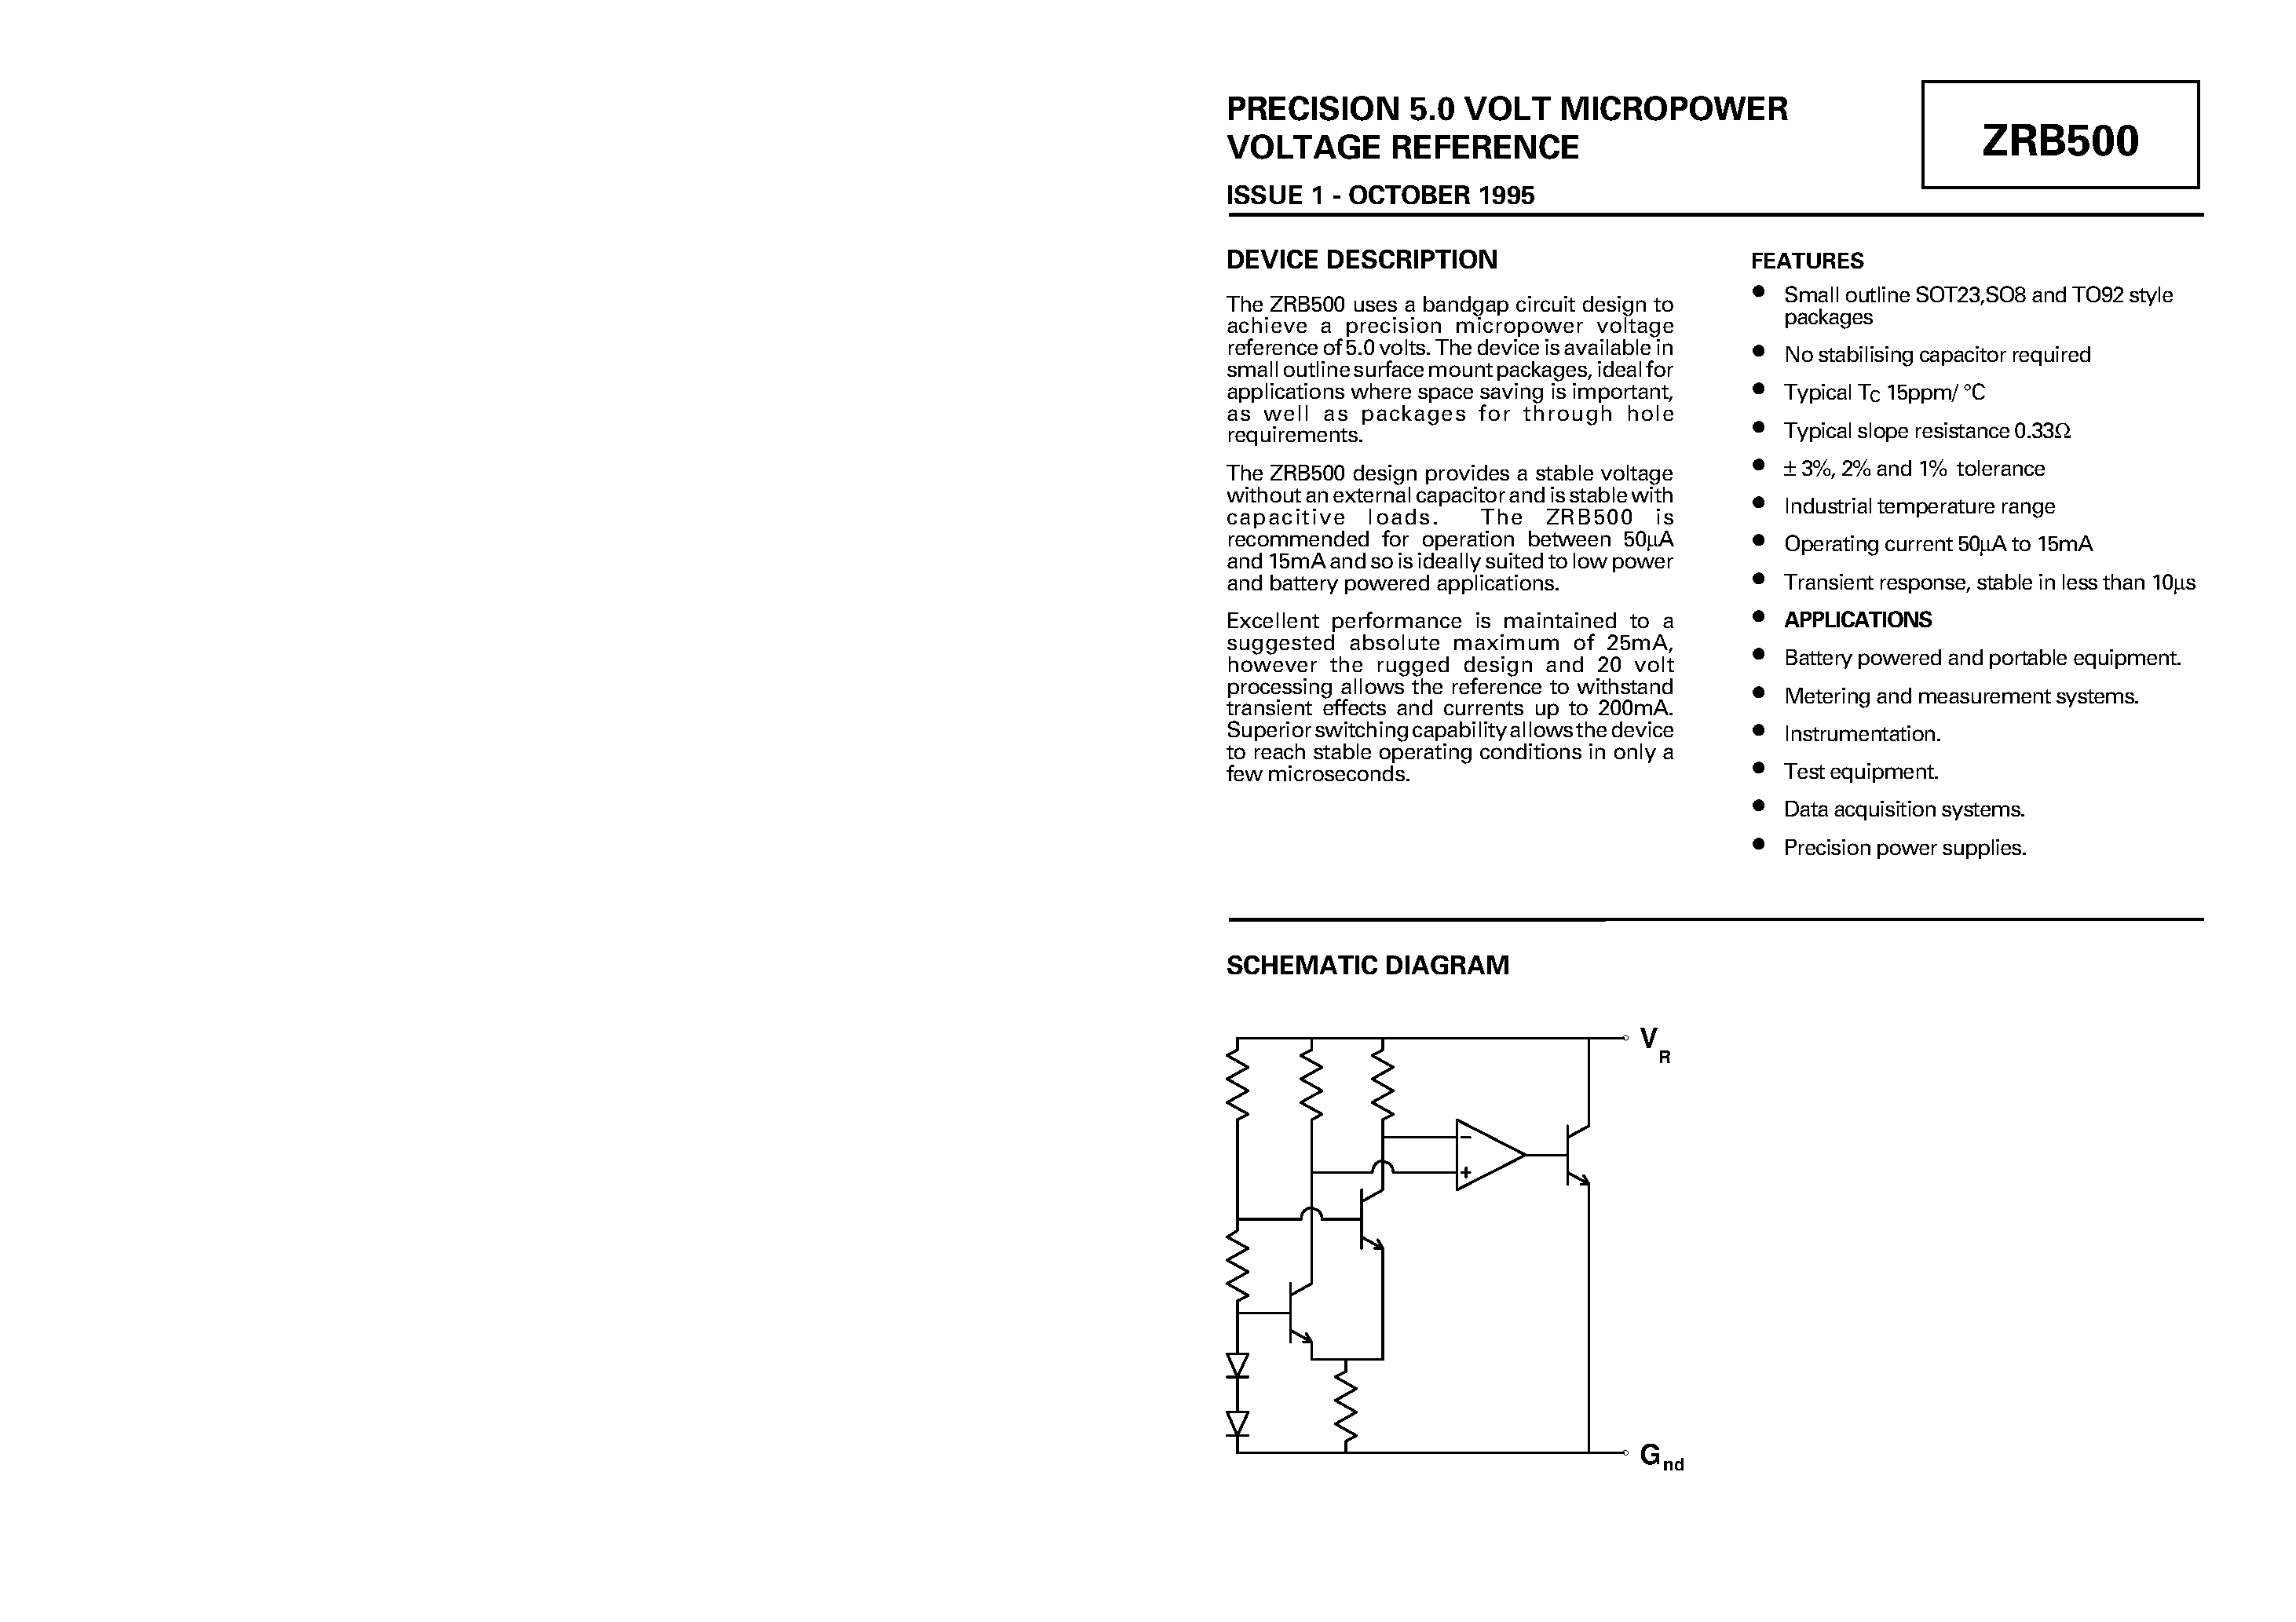 Datasheet ZRB500R01 - PRECISION 5.0 VOLT MICROPOWER VOLTAGE REFERENCE page 1